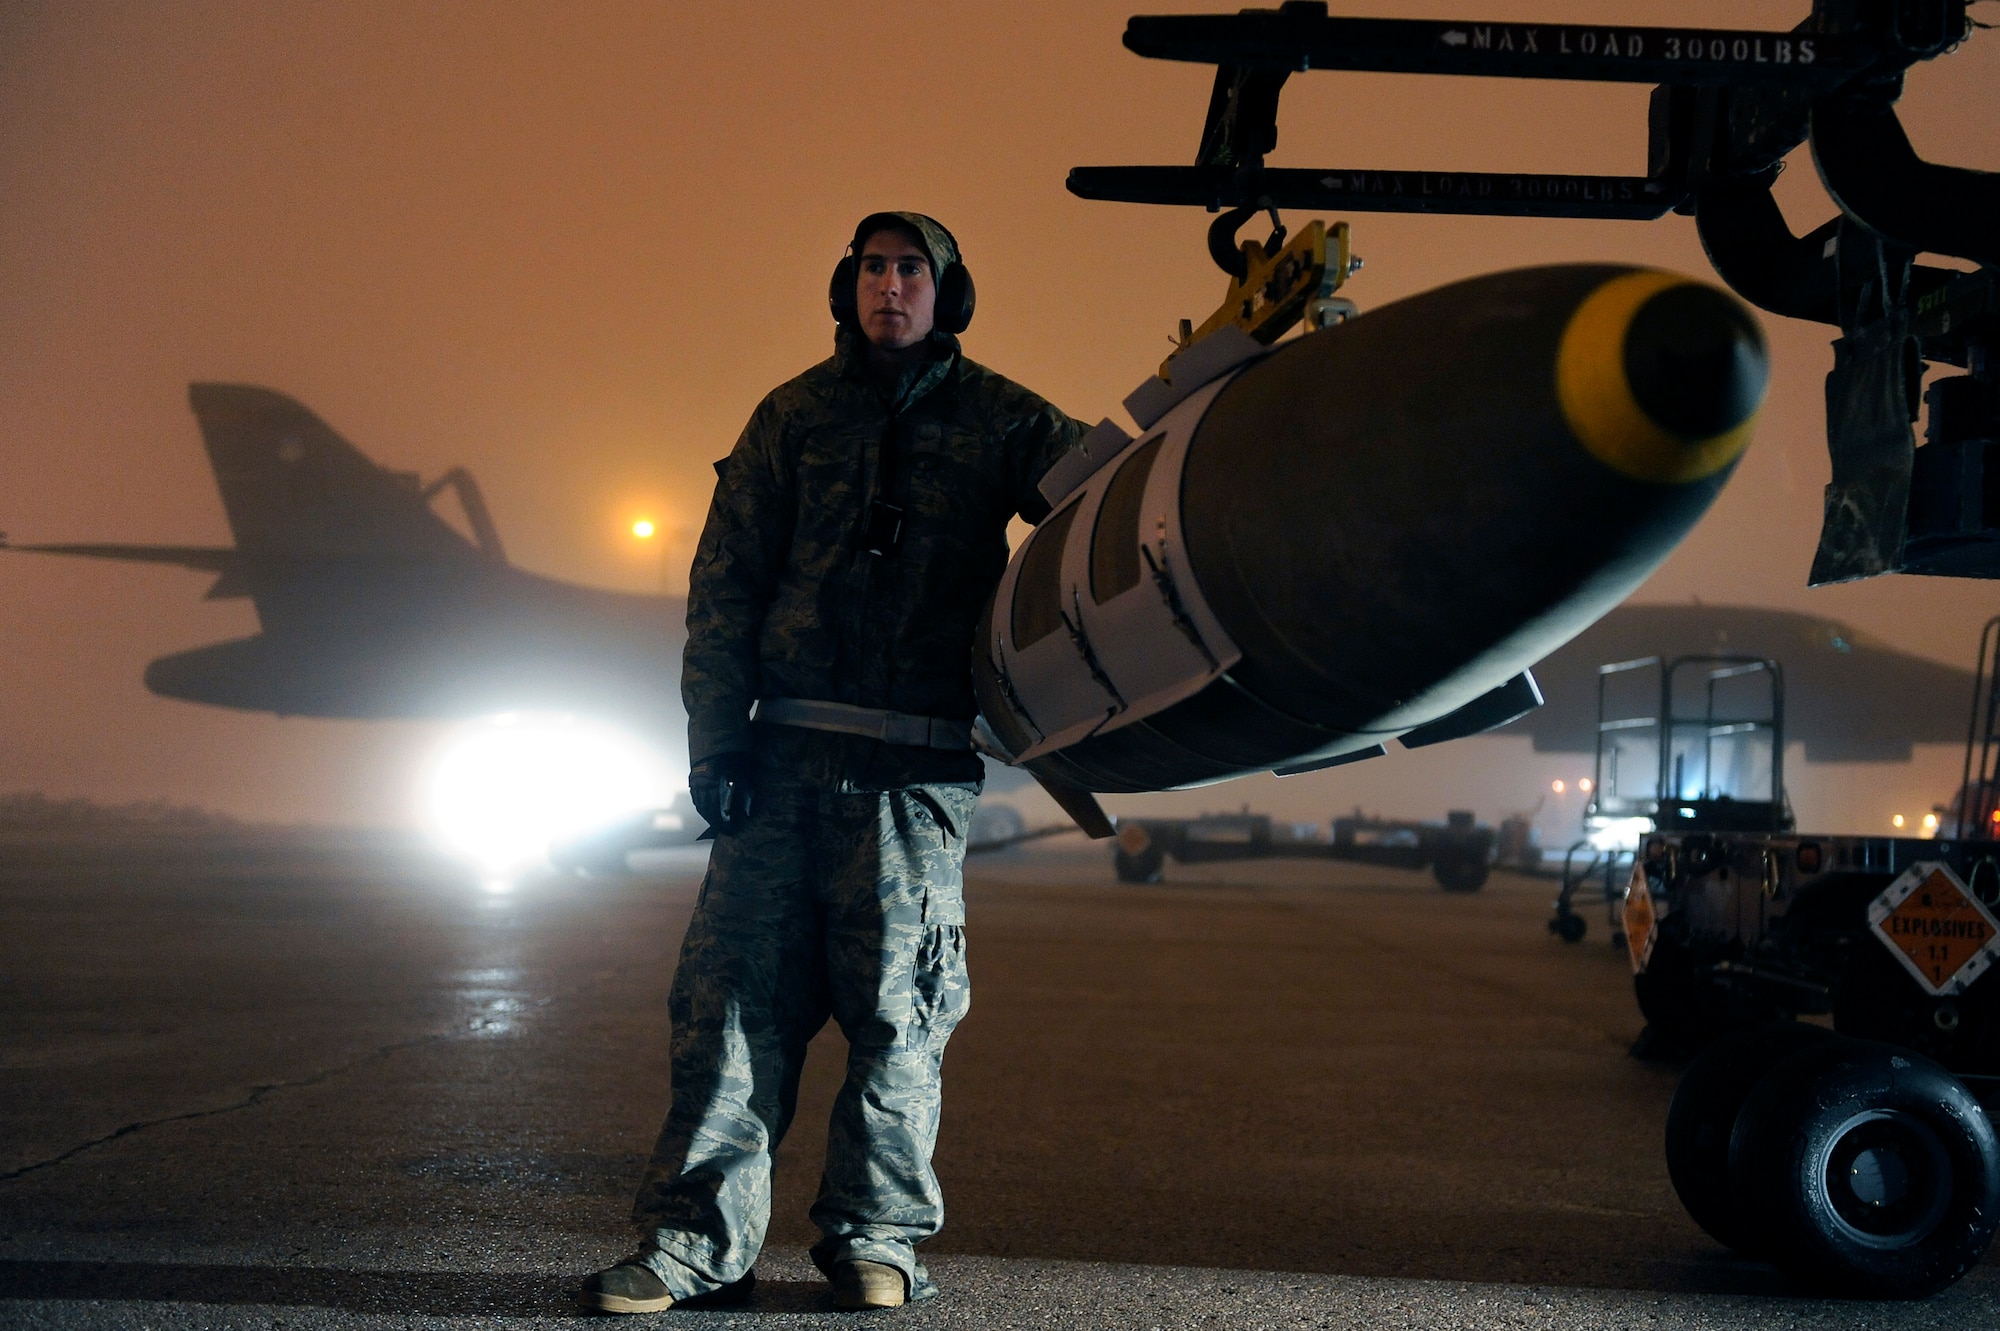 Airman Michael Doto, 28th Aircraft Maintenance Squadron weapon systems technician, steadies a GBU-31 joint direct attack munition while preparing to load it on a B-1B Lancer on Ellsworth Air Force Base, S.D., March 27, 2011.  B-1B Lancers from the 28th Bomb Wing launched early Sunday, March 27 to strike targets in Libya from their home station of Ellsworth Air Force Base in support of Operation Odyssey Dawn. (U.S. Air Force photo/Staff Sgt. Marc I. Lane)  